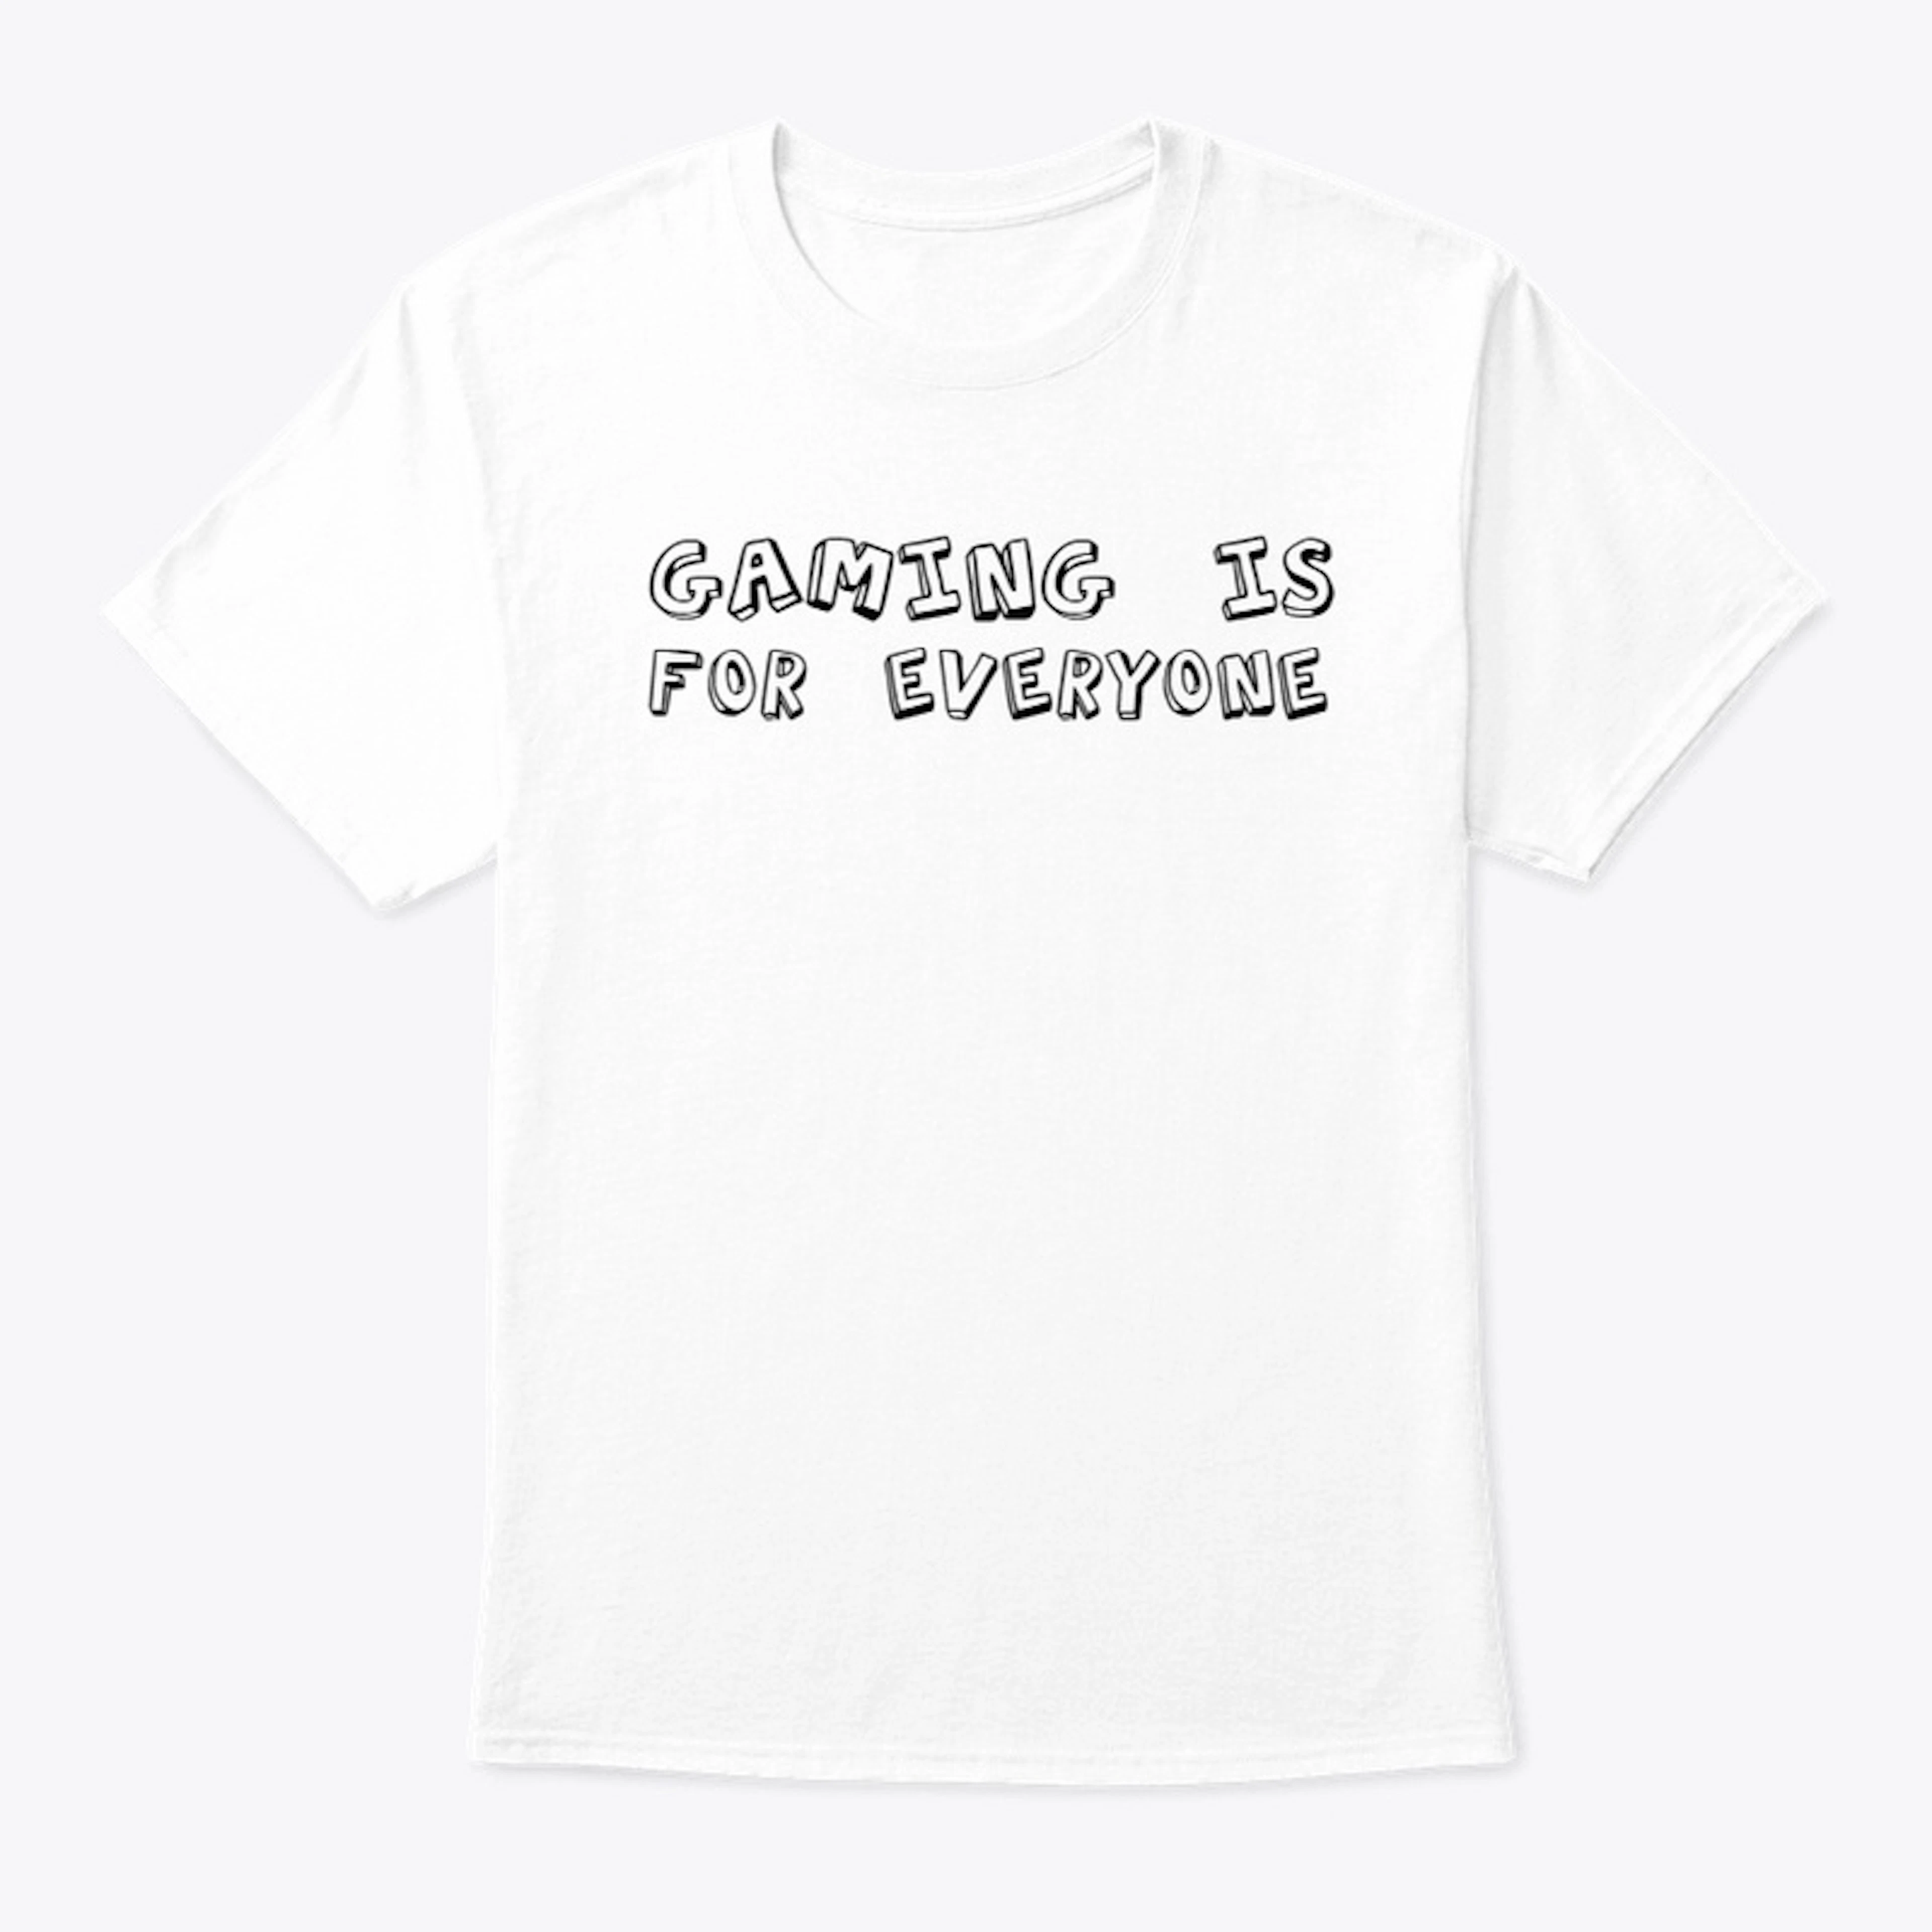 Gaming is for everyone T-Shirt